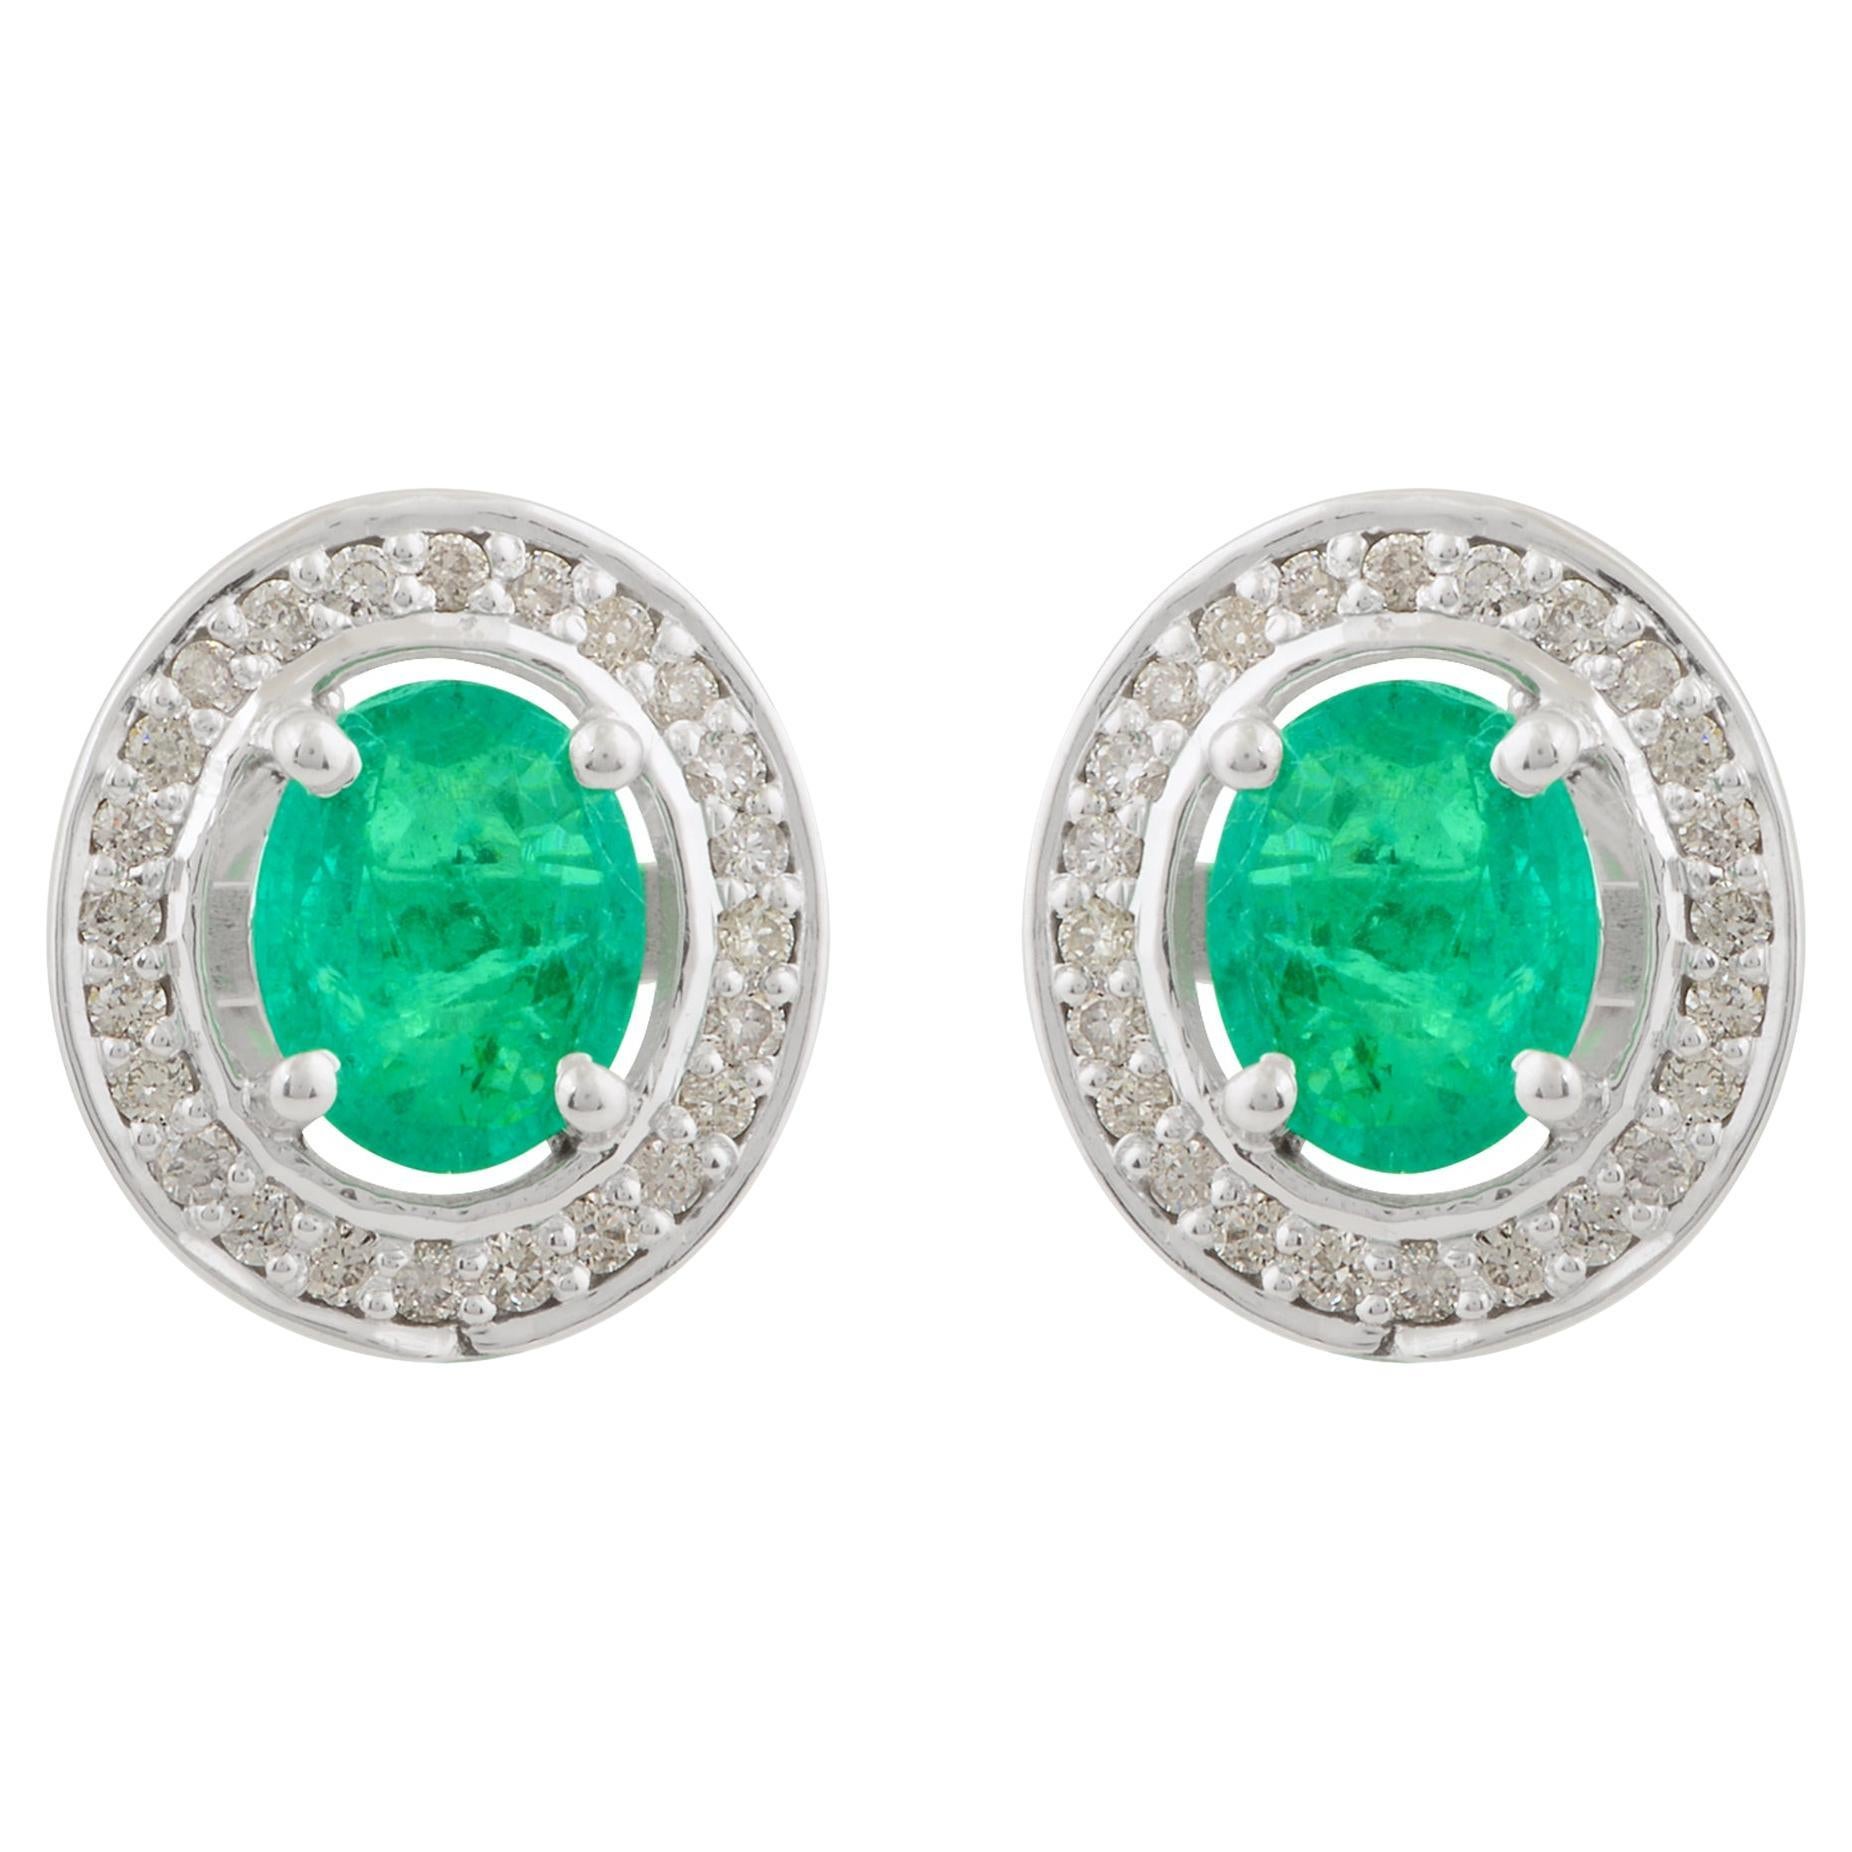 Natural Emerald Gemstone Stud Earrings Diamond Solid 10k White Gold Fine Jewelry For Sale